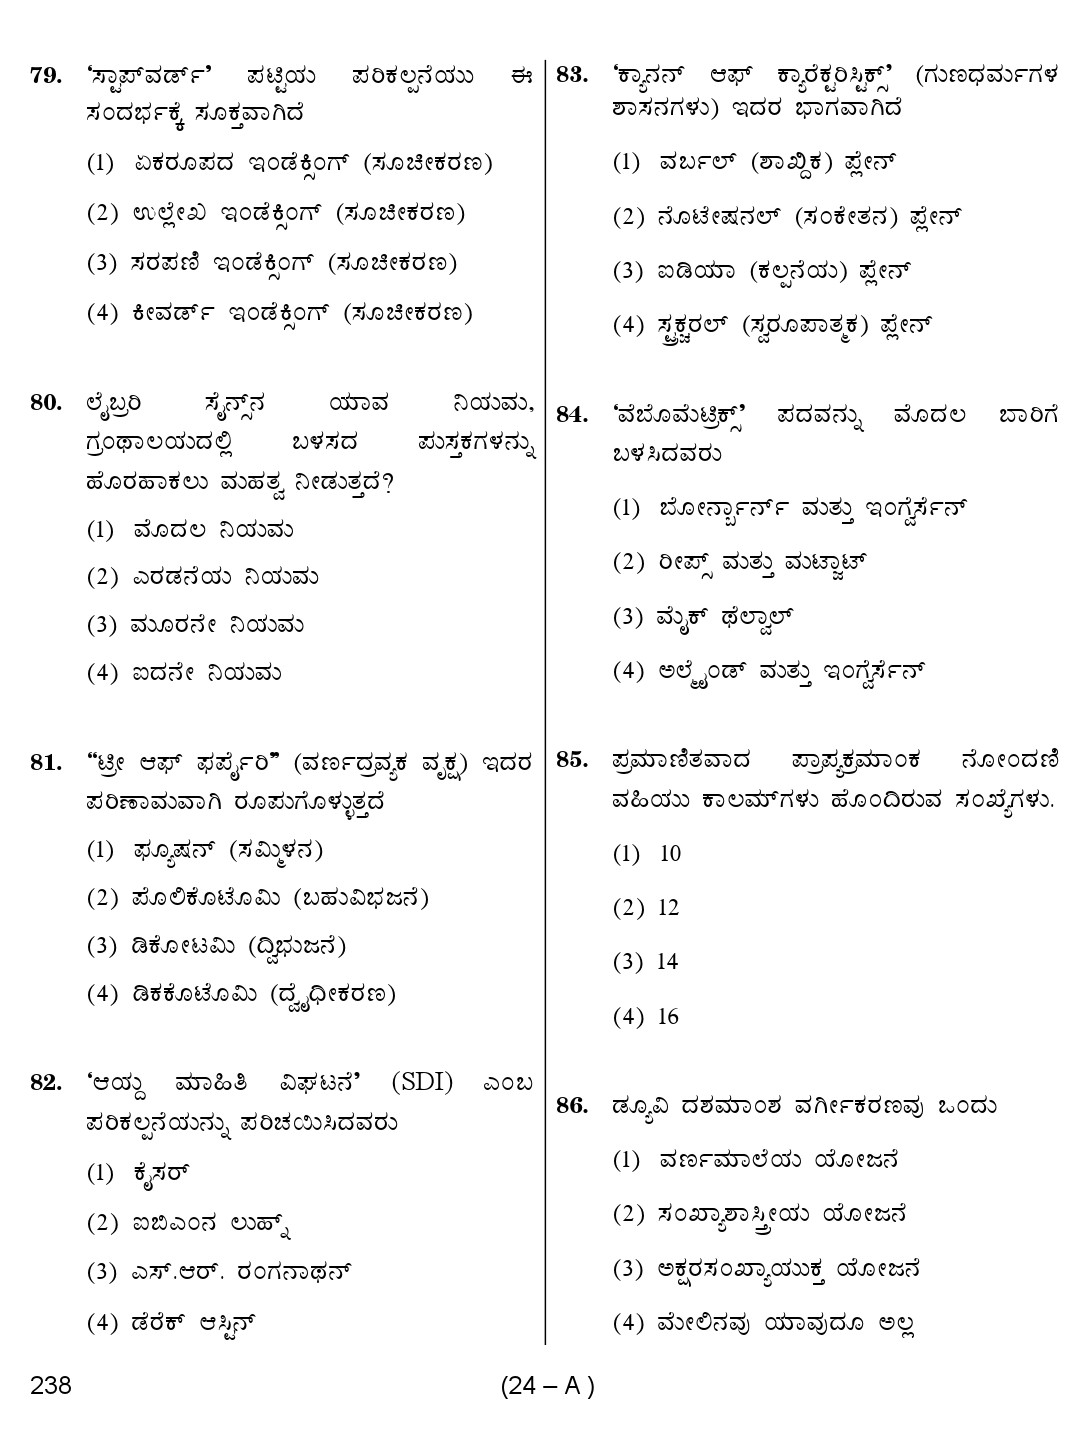 Karnataka PSC 238 Specific Paper II Librarian Exam Sample Question Paper 24